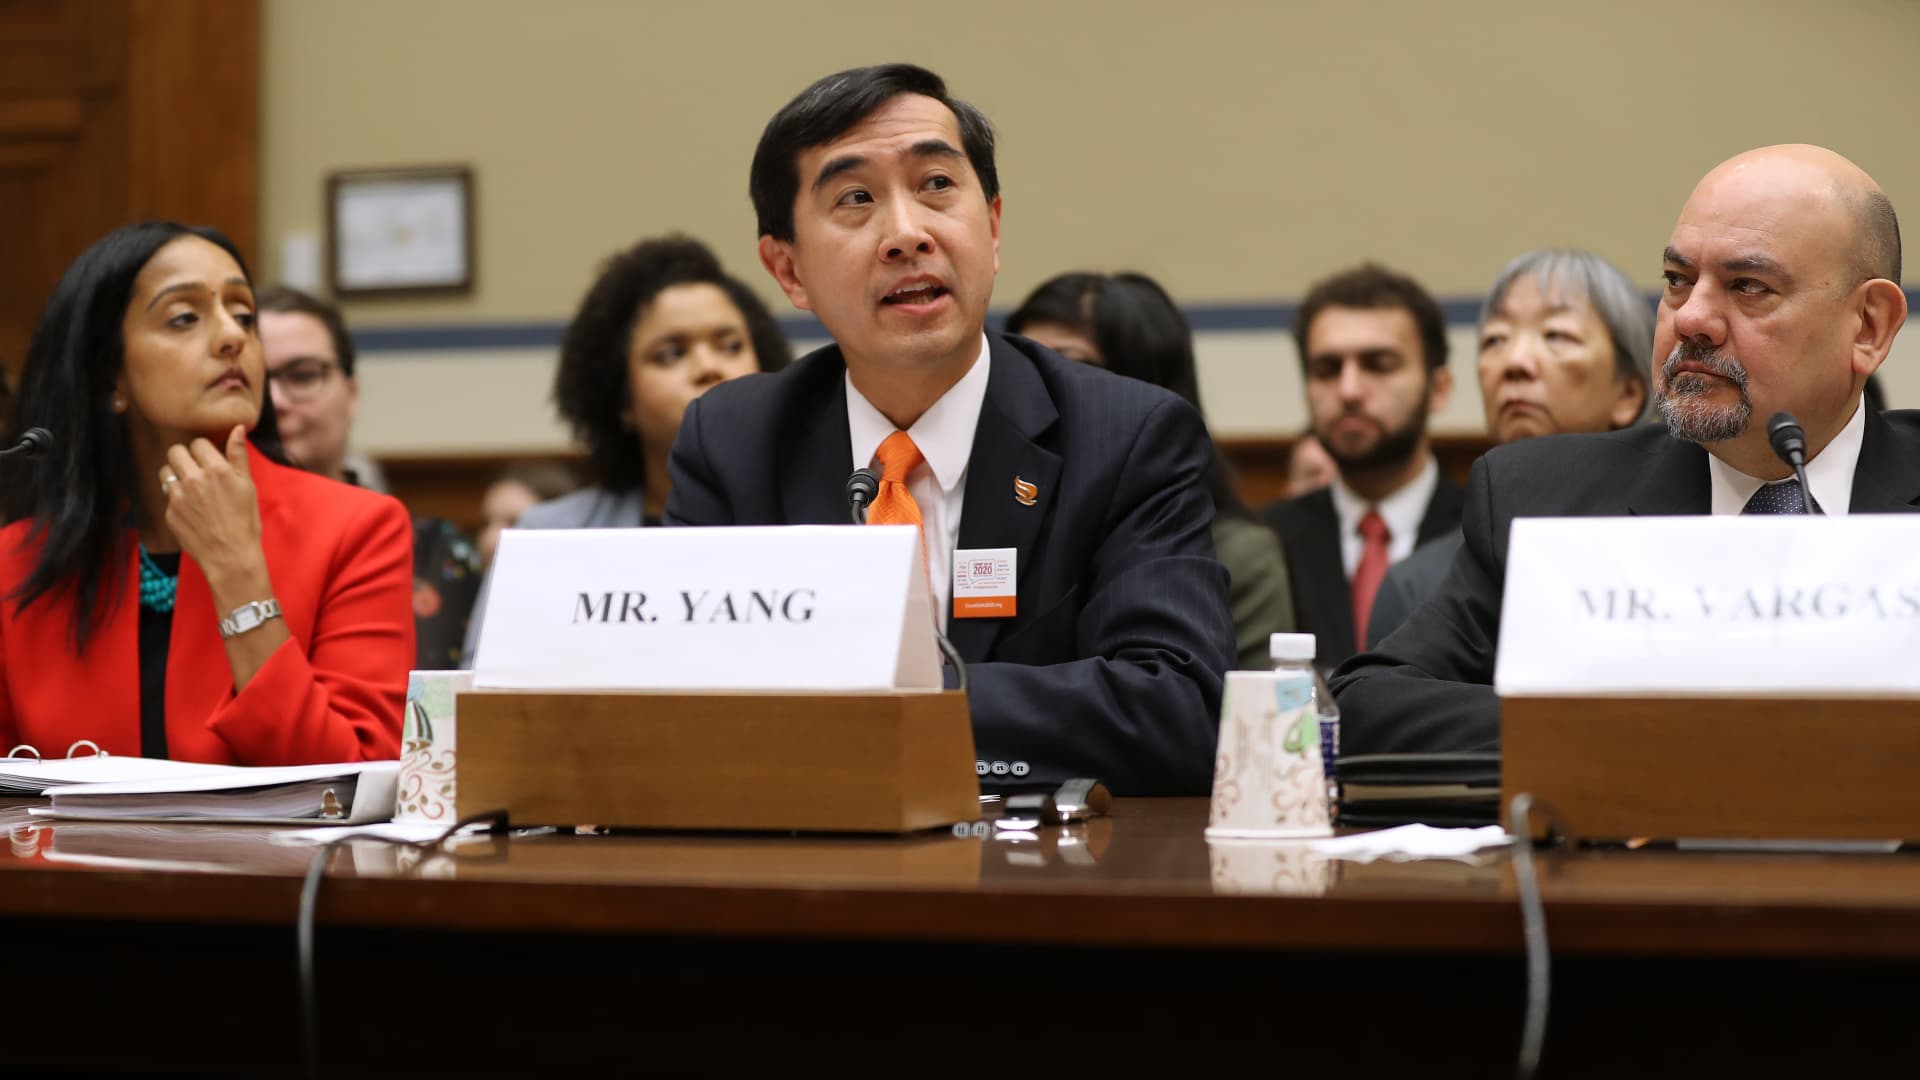 Asian Americans Advancing Justice Executive Director John Yang, center, testifies before the House Oversight and Reform Committee about the 2020 census in the Rayburn House Office Building on Capitol Hill January 09, 2020 in Washington, DC.